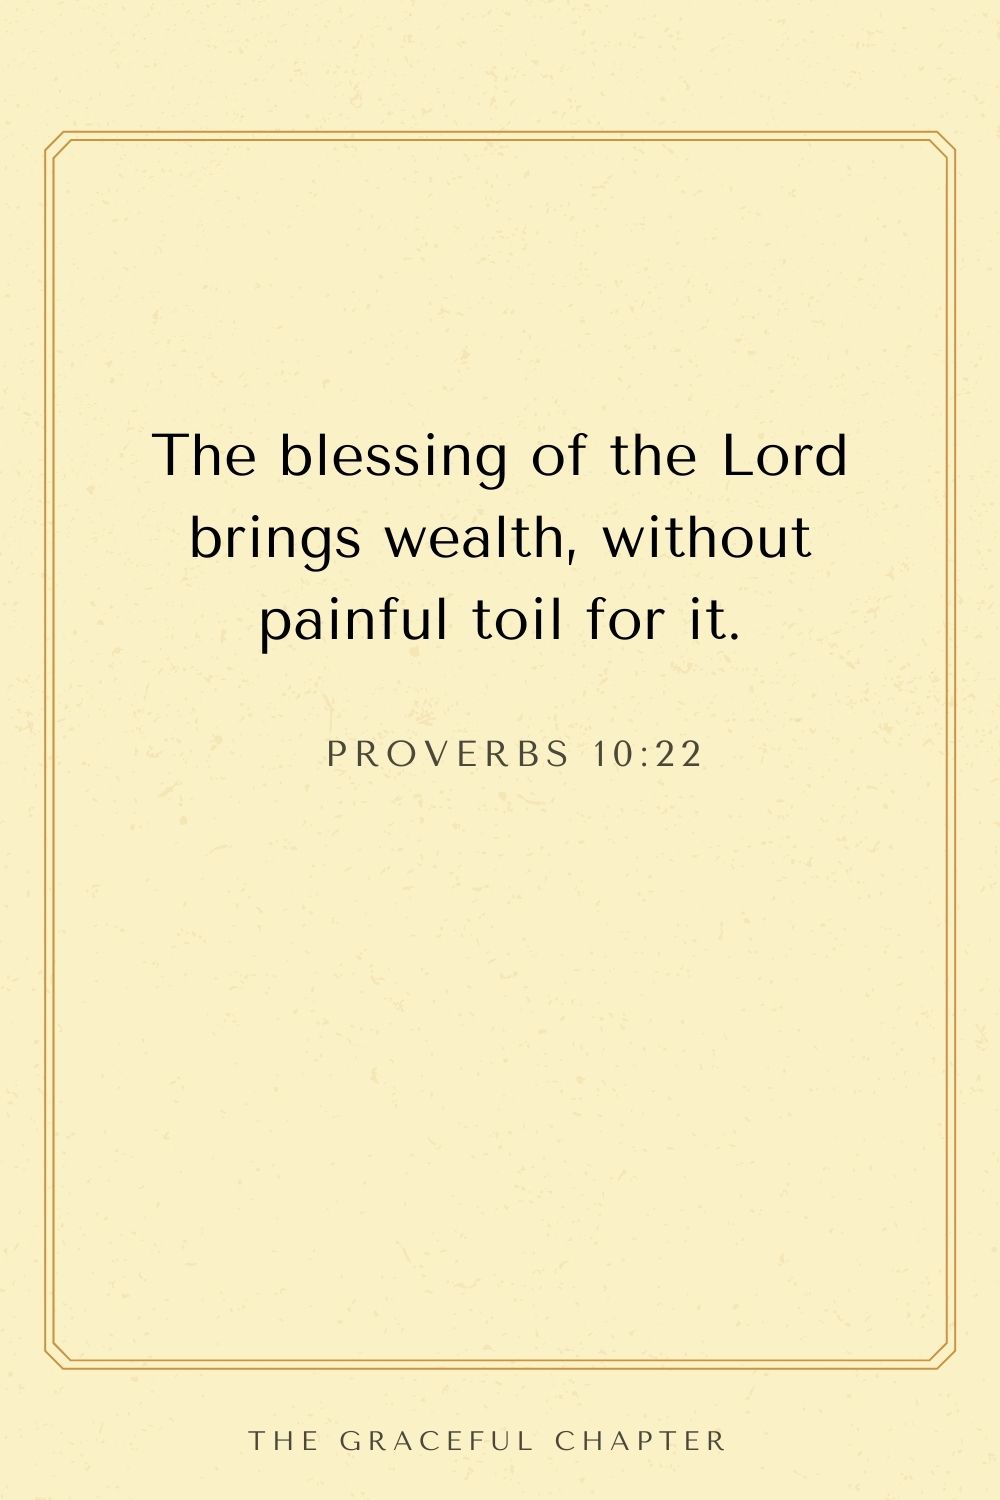 The blessing of the Lord brings wealth, without painful toil for it. Proverbs 10:22